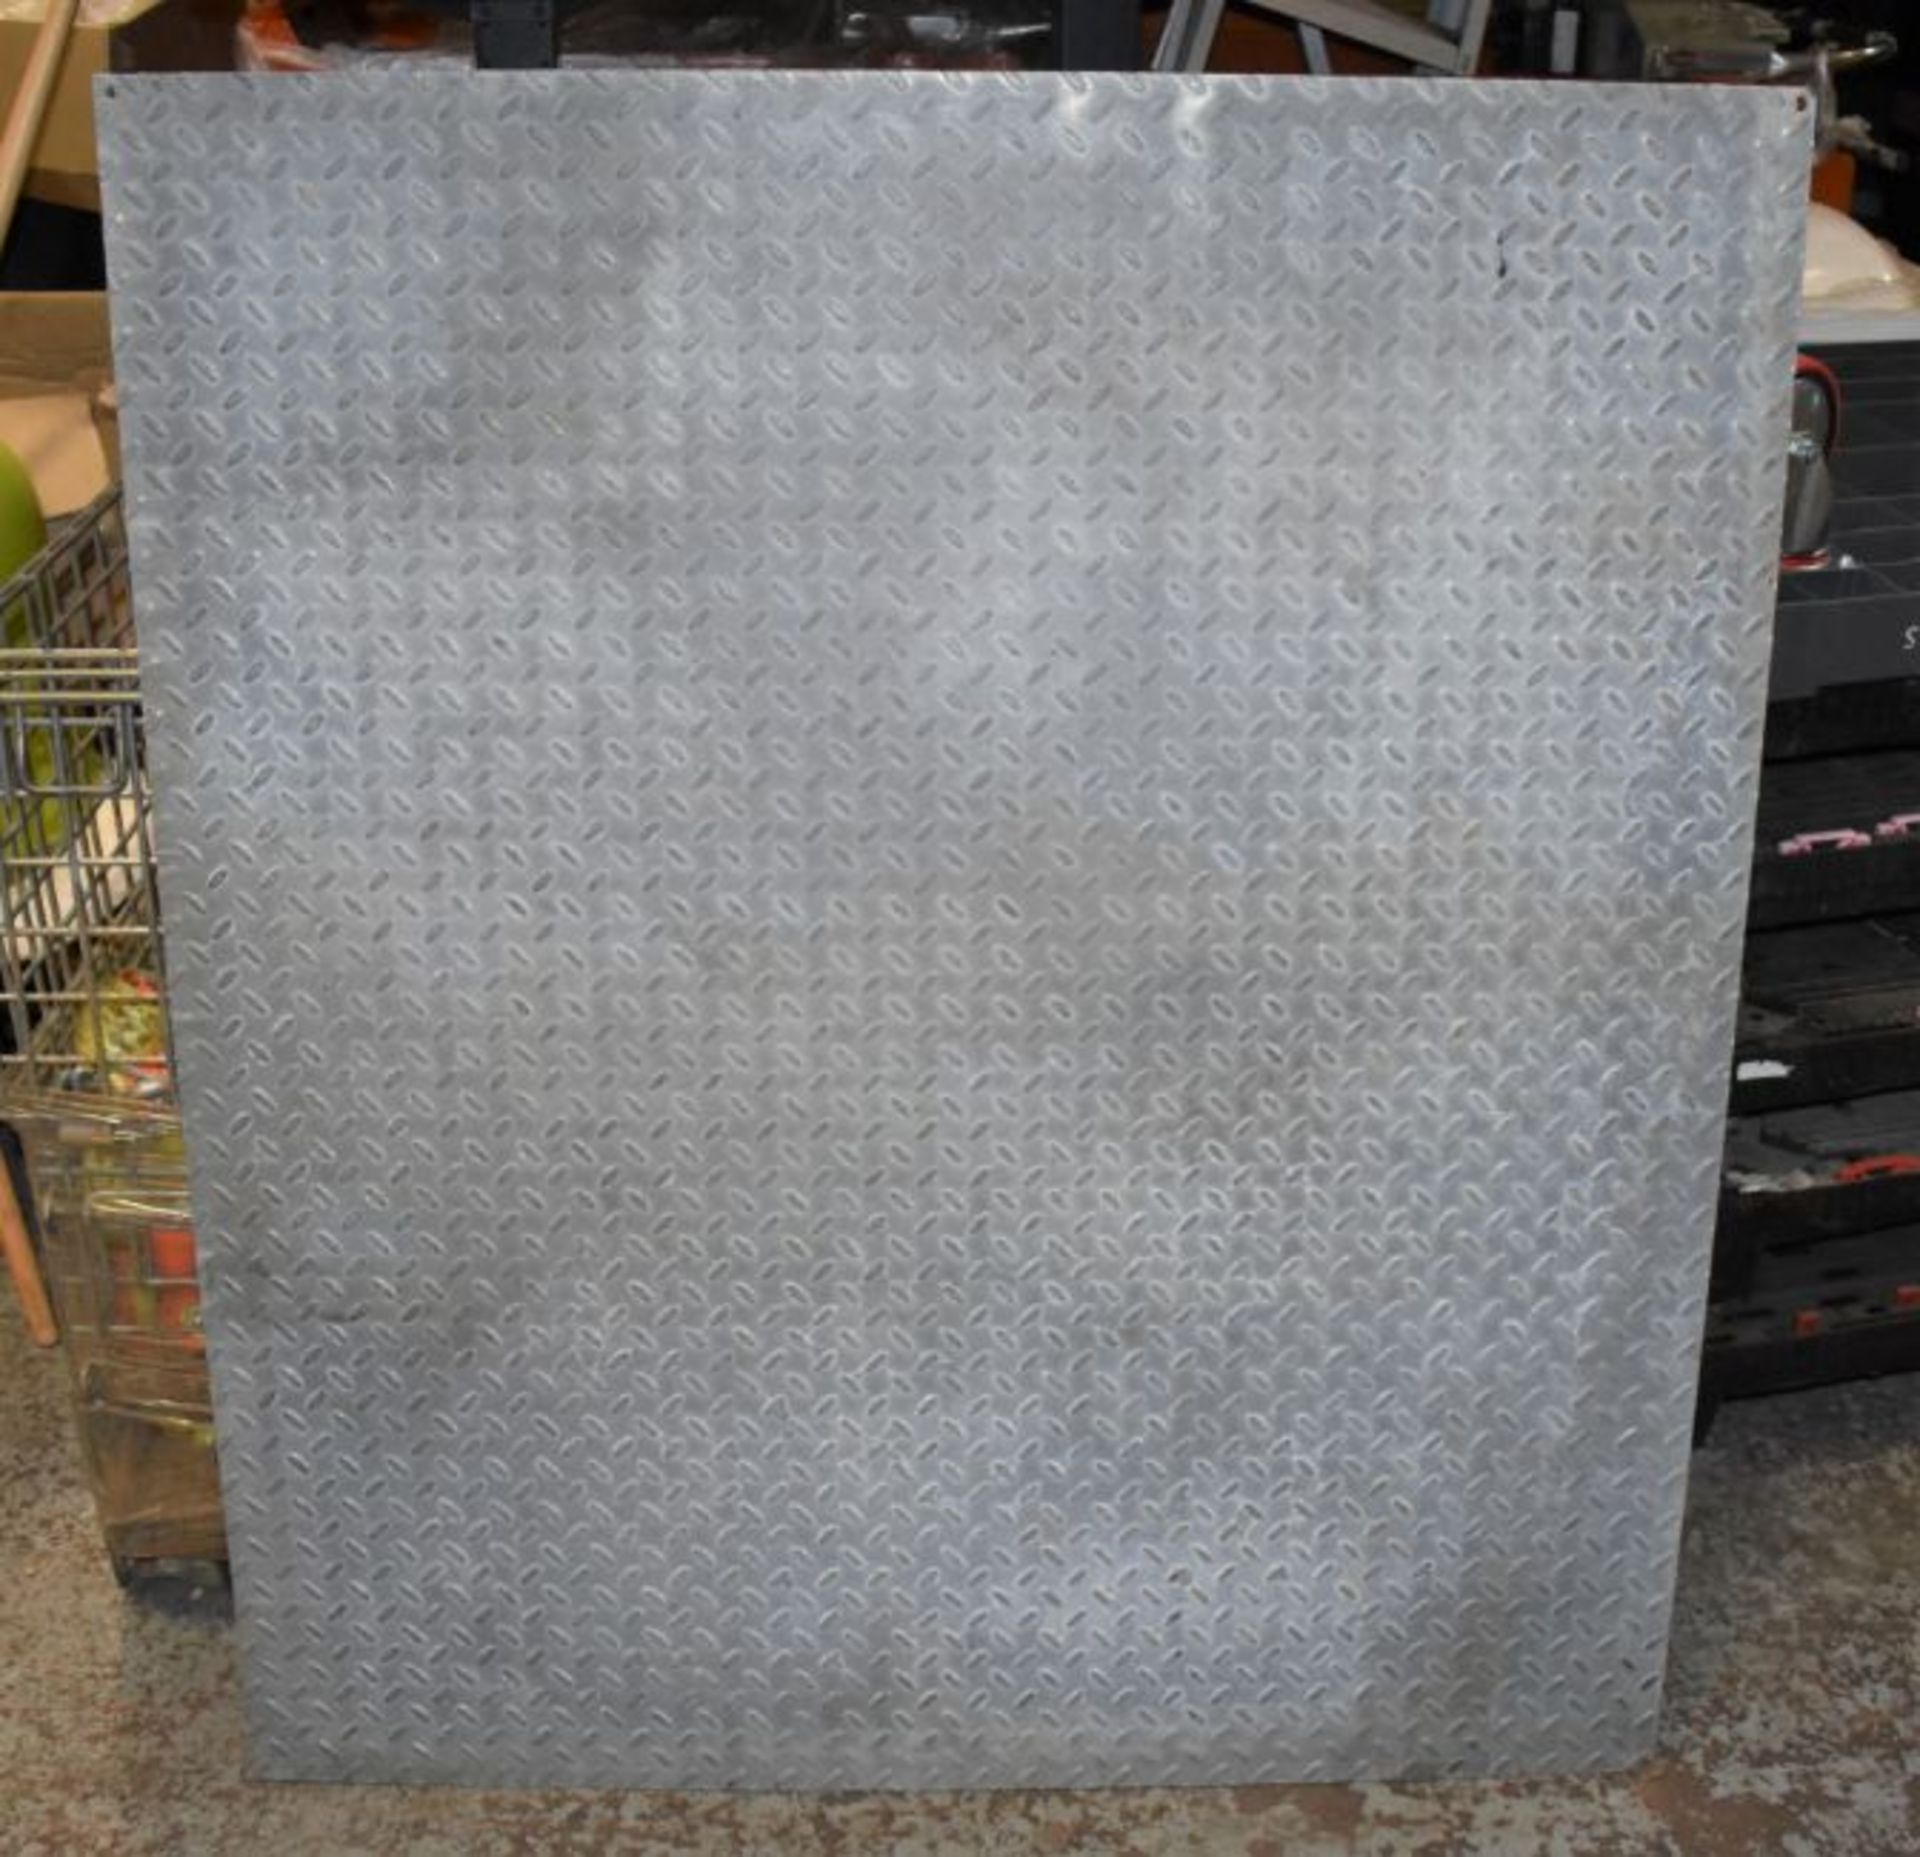 1 x Steel Tread Checker Plate - Size 106.5 x 122 x 0.6 cms - None Slip Floor Plate Suitable For - Image 6 of 6